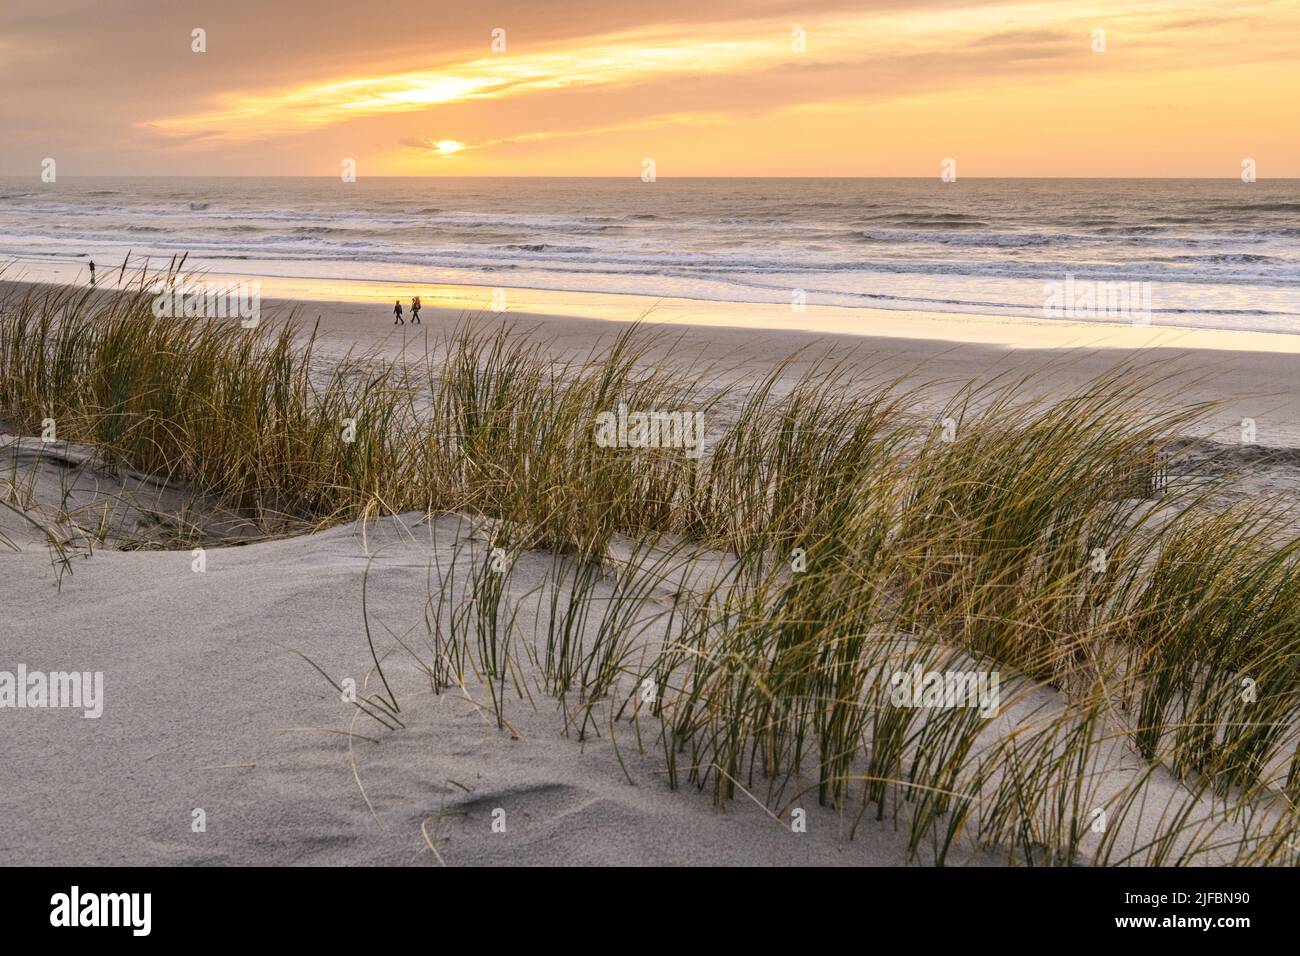 France, Somme, Fort-Mahon, the Marquenterre dunes between Fort-Mahon and the Baie d'Authie at sunset Stock Photo